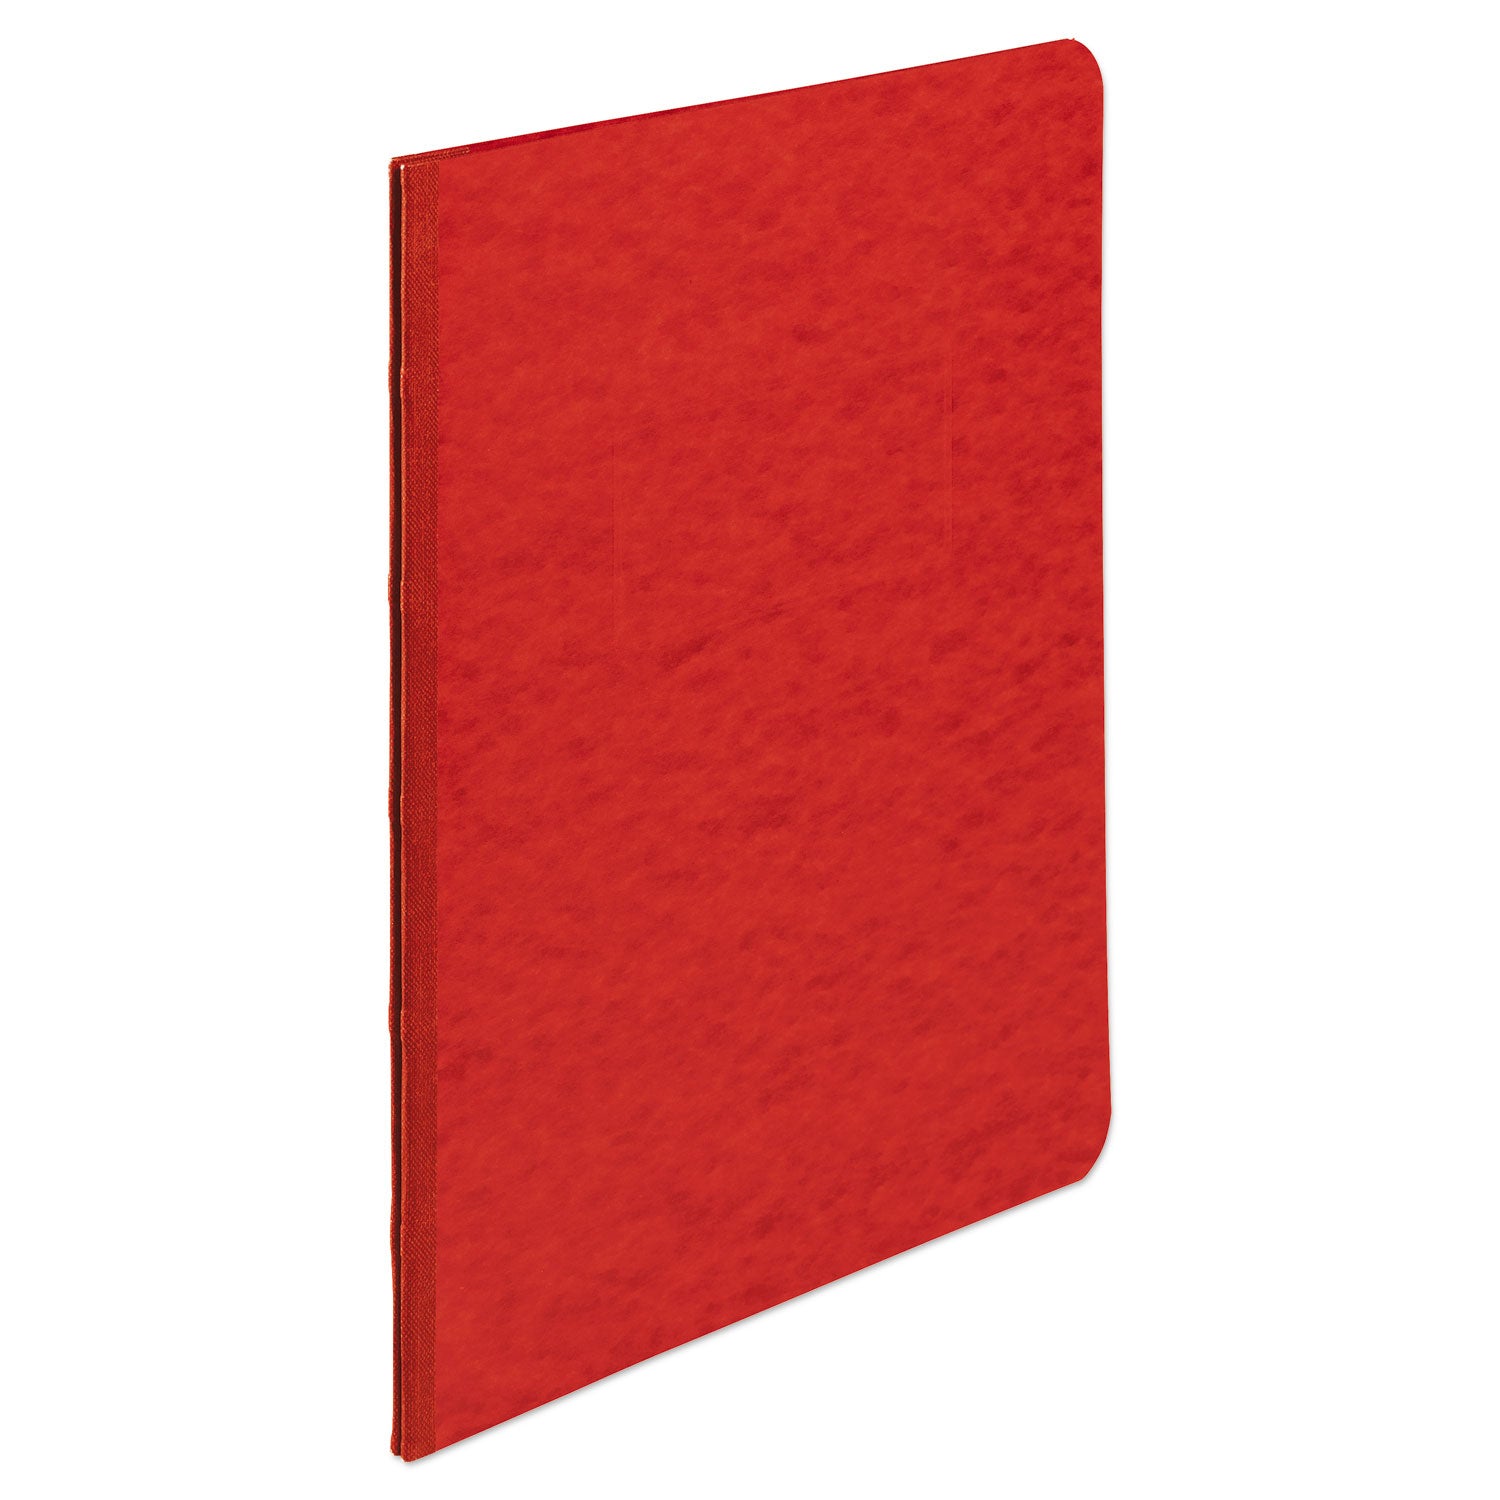 Pressboard Report Cover with Tyvek Reinforced Hinge, Two-Piece Prong Fastener, 3" Capacity, 11 x 17, Red/Red - 